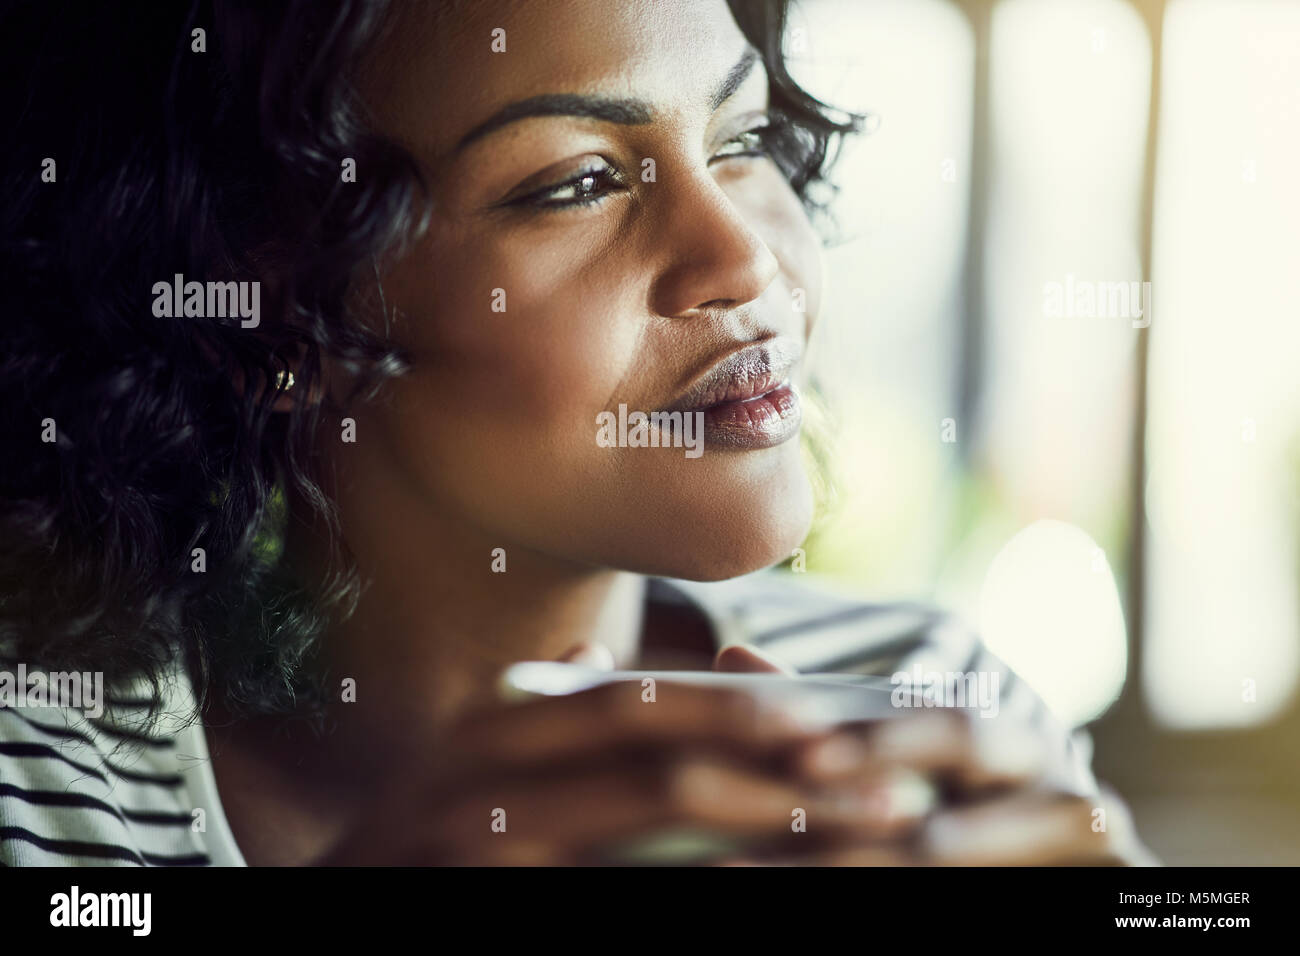 Smiling young African woman looking deep in thought while enjoying a fresh cup of coffee Stock Photo